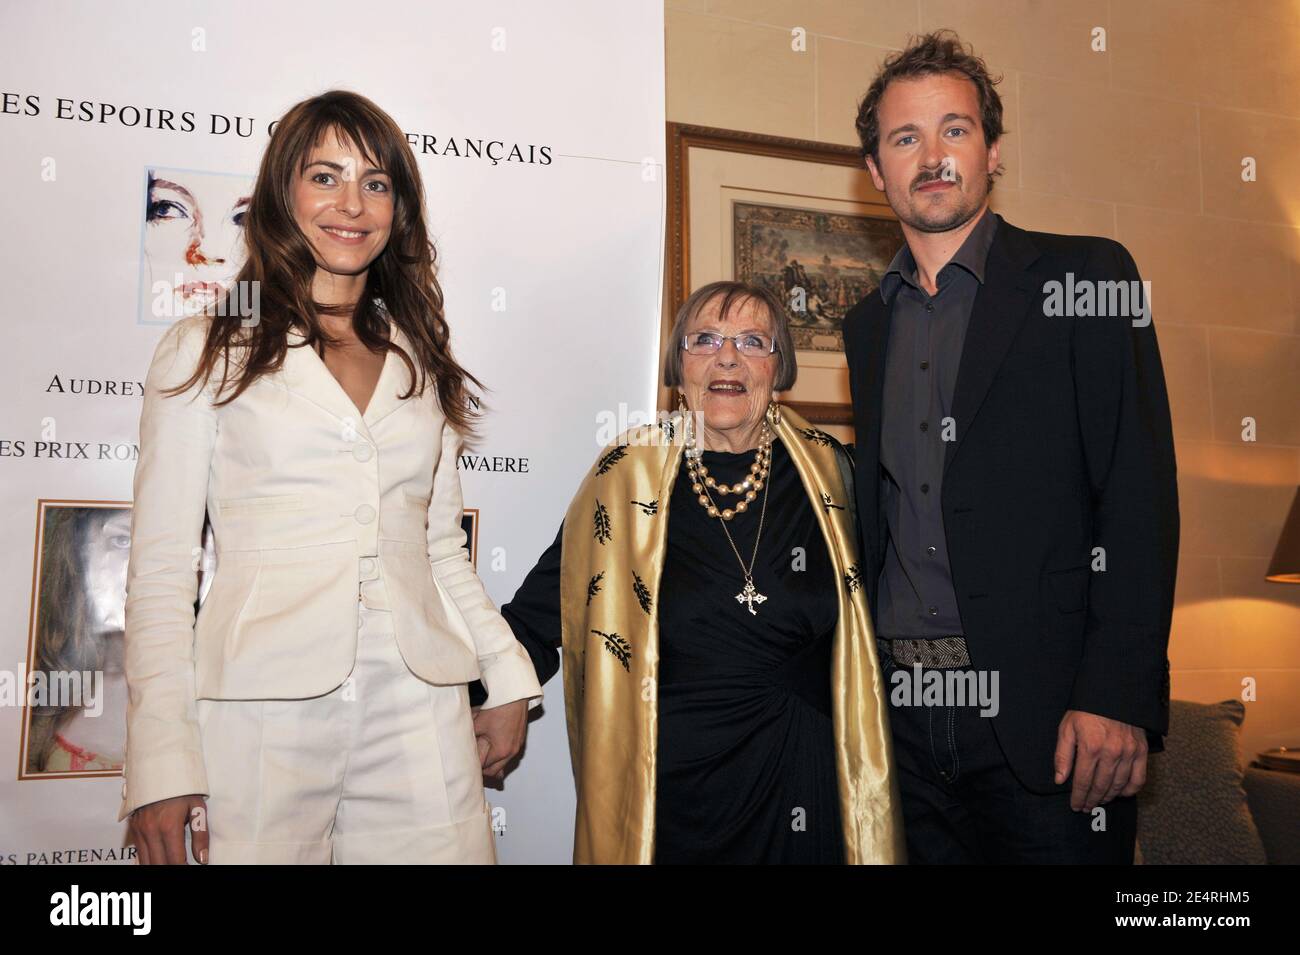 French actors Audrey Dana and Jocelyn Quivrin, winners of cinema prize 'Prix Romy Schneider-Patrick Dewaere 2008' meet with Patrick Dewaere's mother Mado Maurin inside Royal Monceau Hotel in Paris, France on March 17, 2008 prior to the official award ceremony. Photo by Christophe Guibbaud/ABACAPRESS.COM Stock Photo